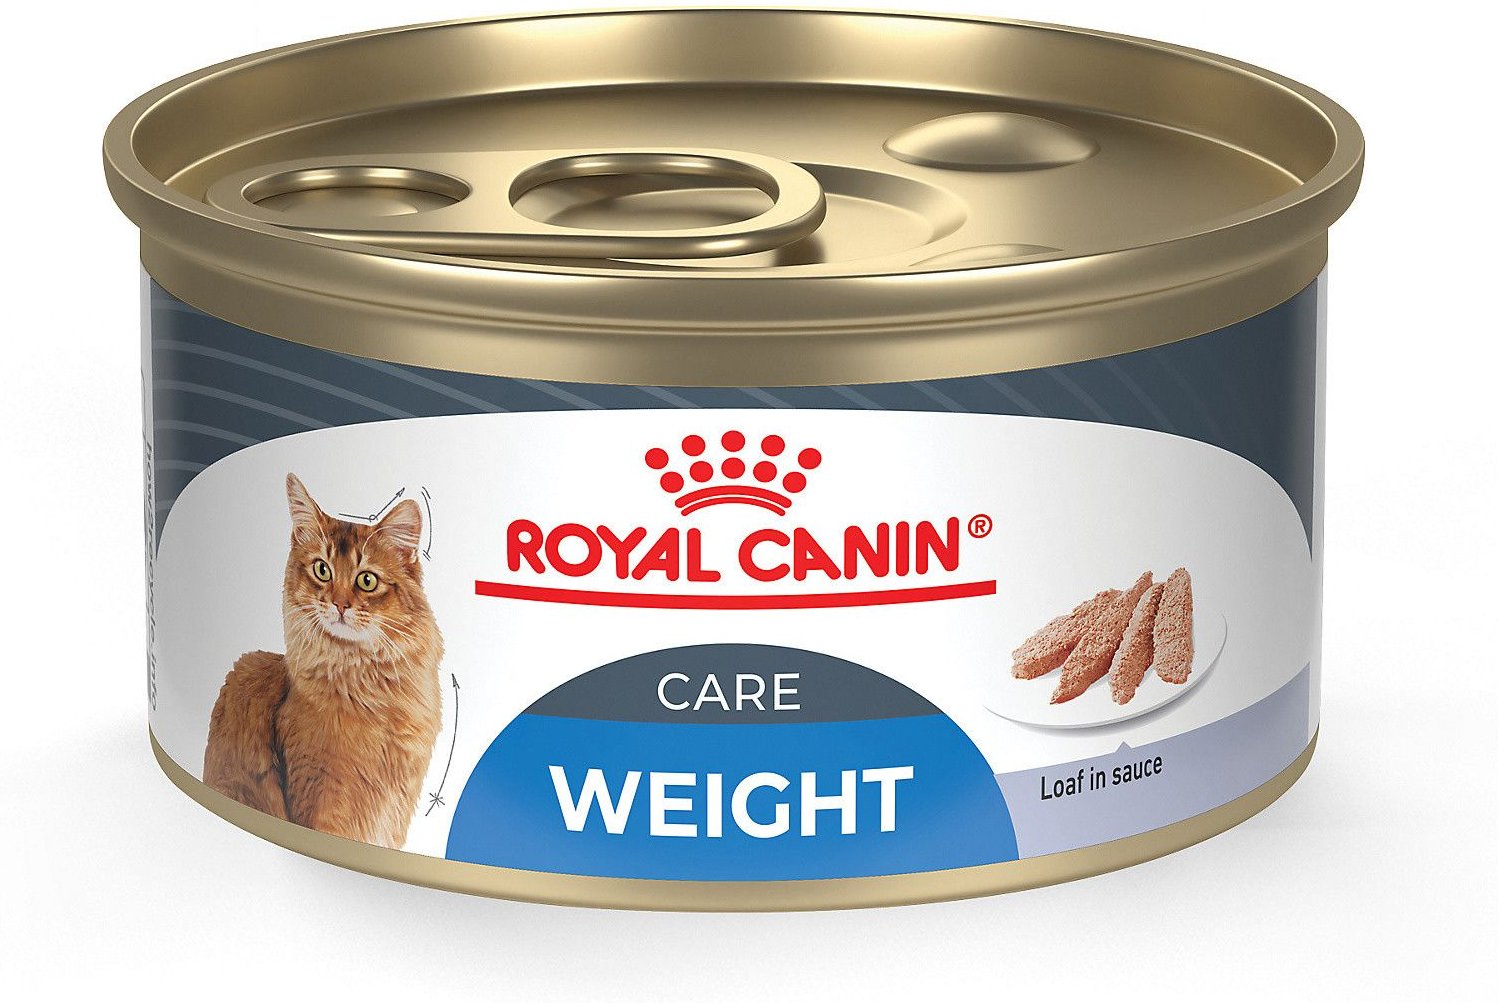 ROYAL CANIN Feline Weight Care Loaf in Sauce Canned Cat Food, 3-oz